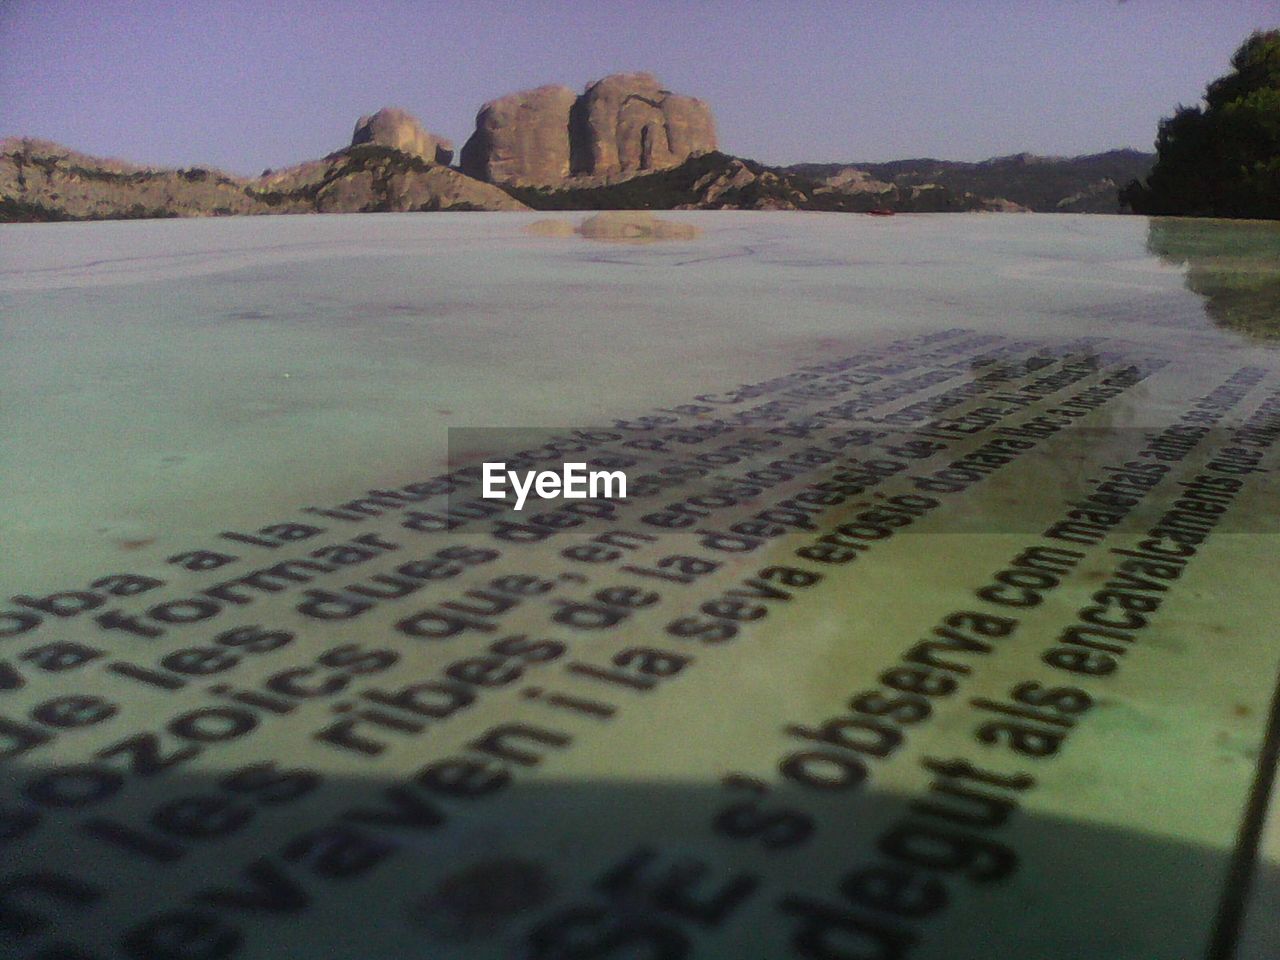 Close-up of text on beach against sky